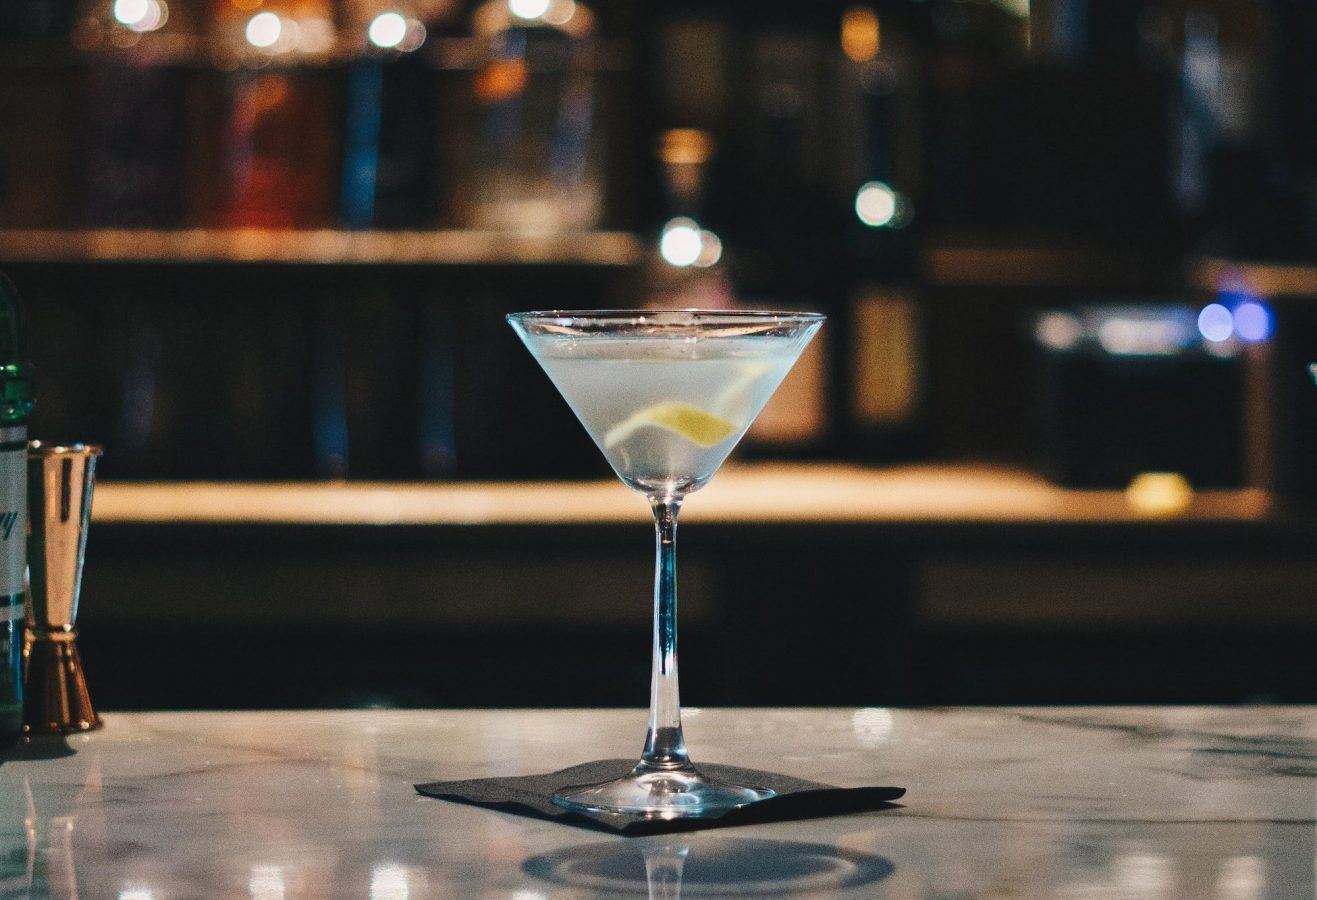 How to make a perfect martini, according to an expert